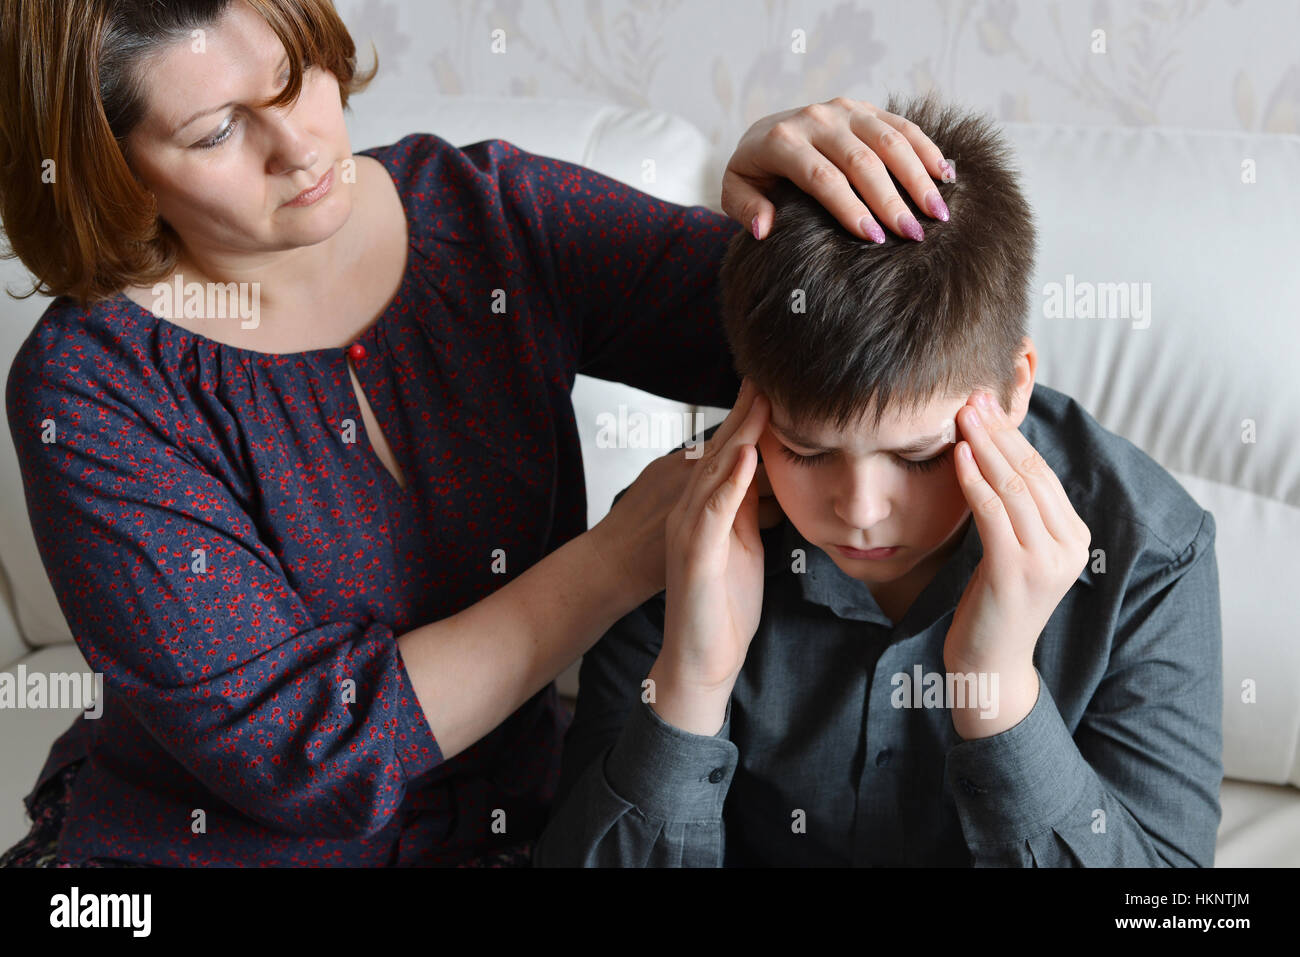 mother cares for her son who has headache Stock Photo